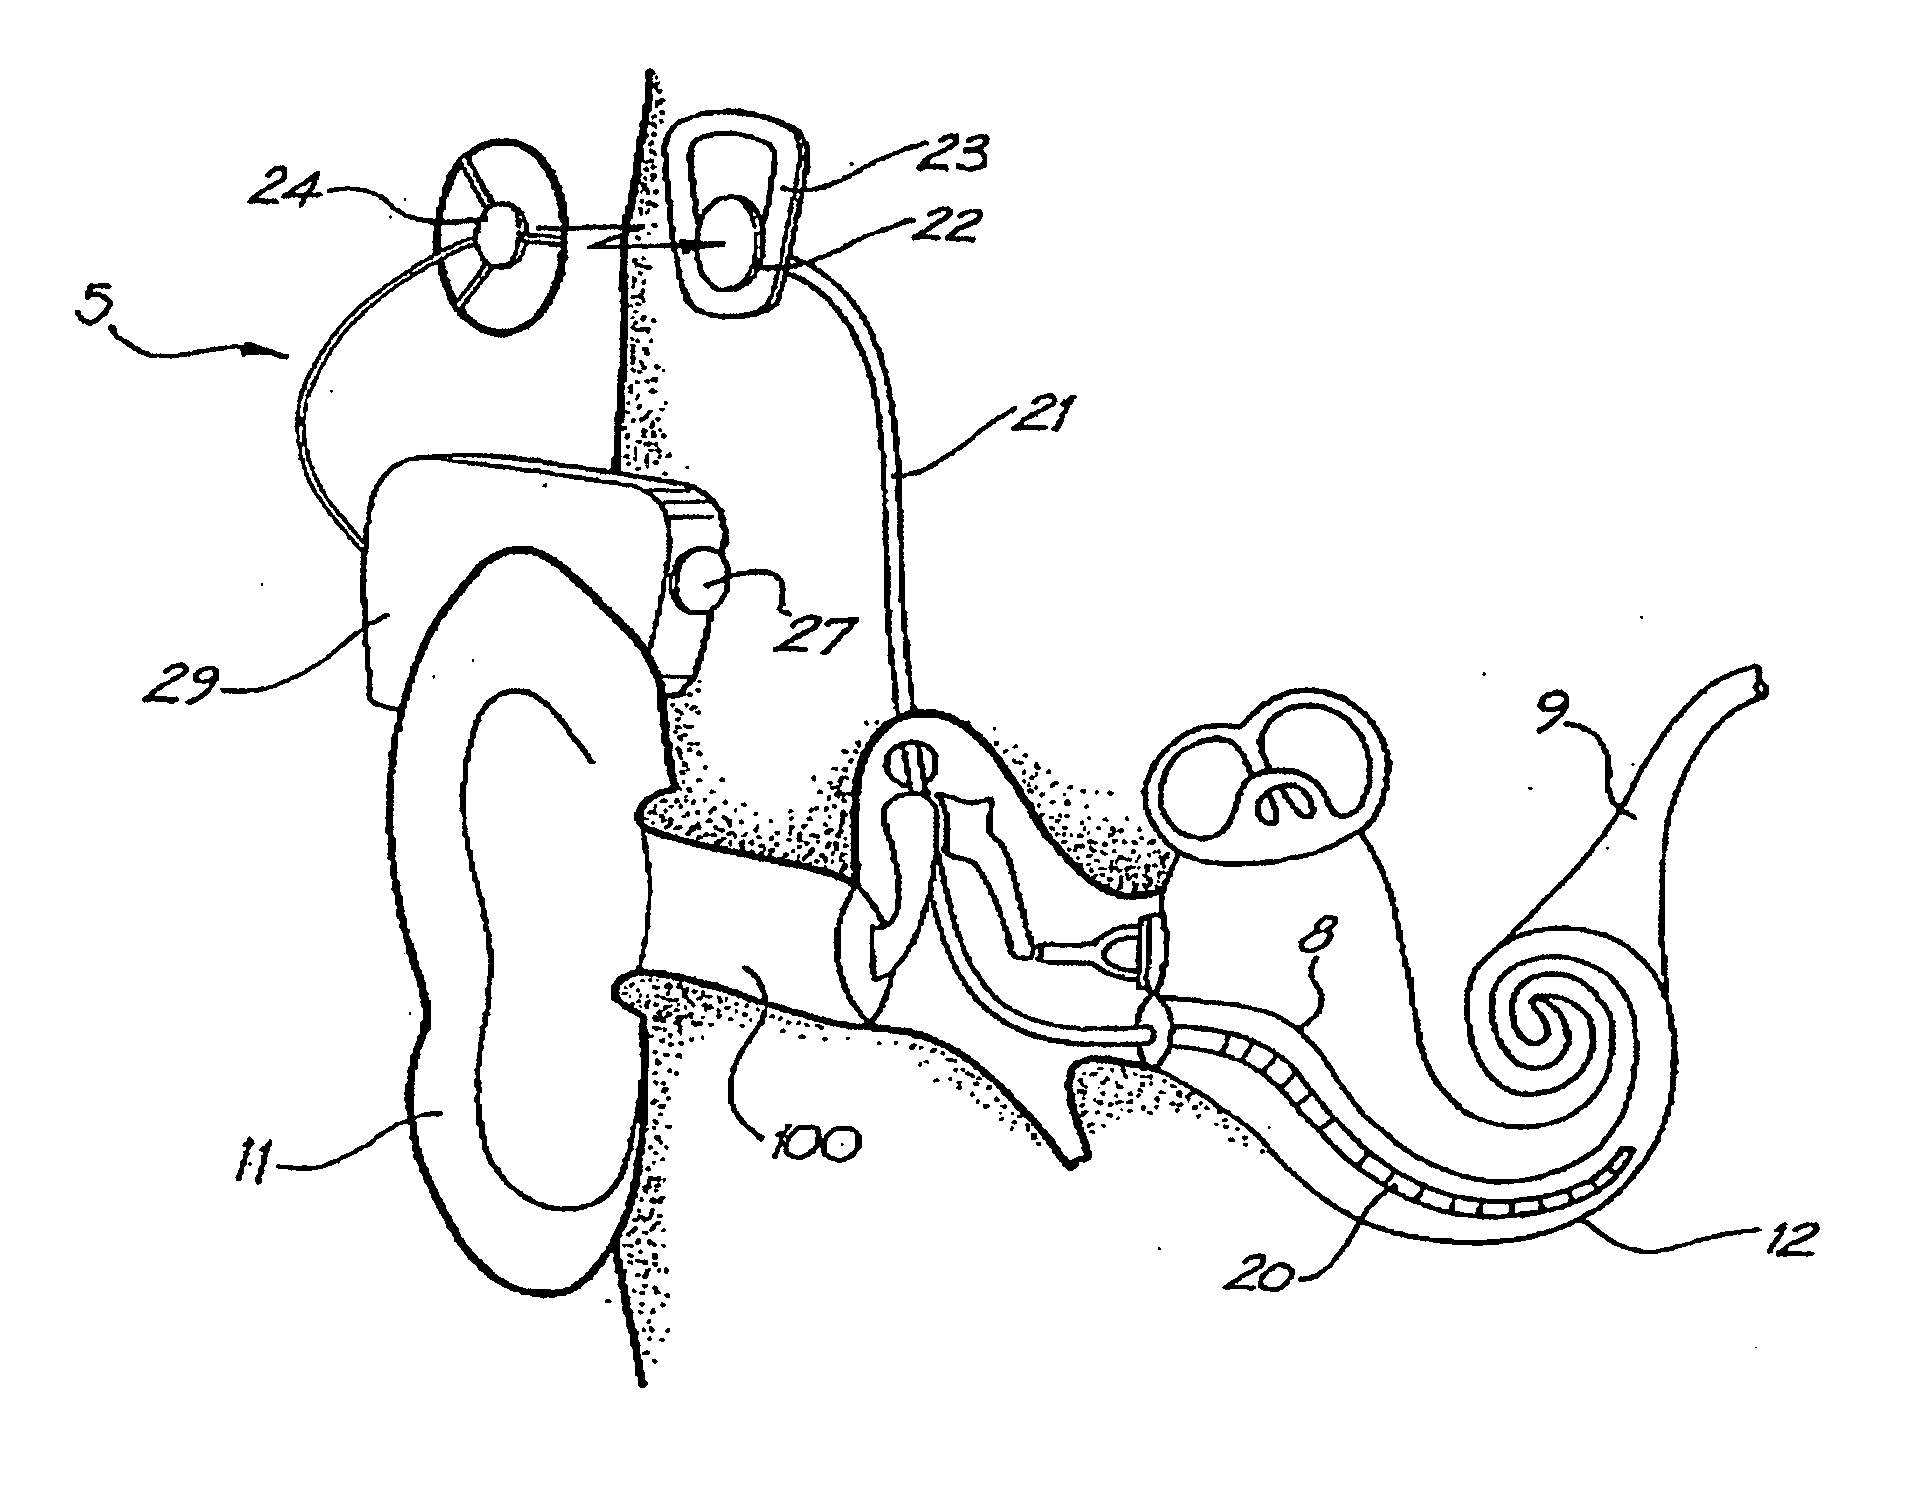 General purpose accessory for a cochlear implant system